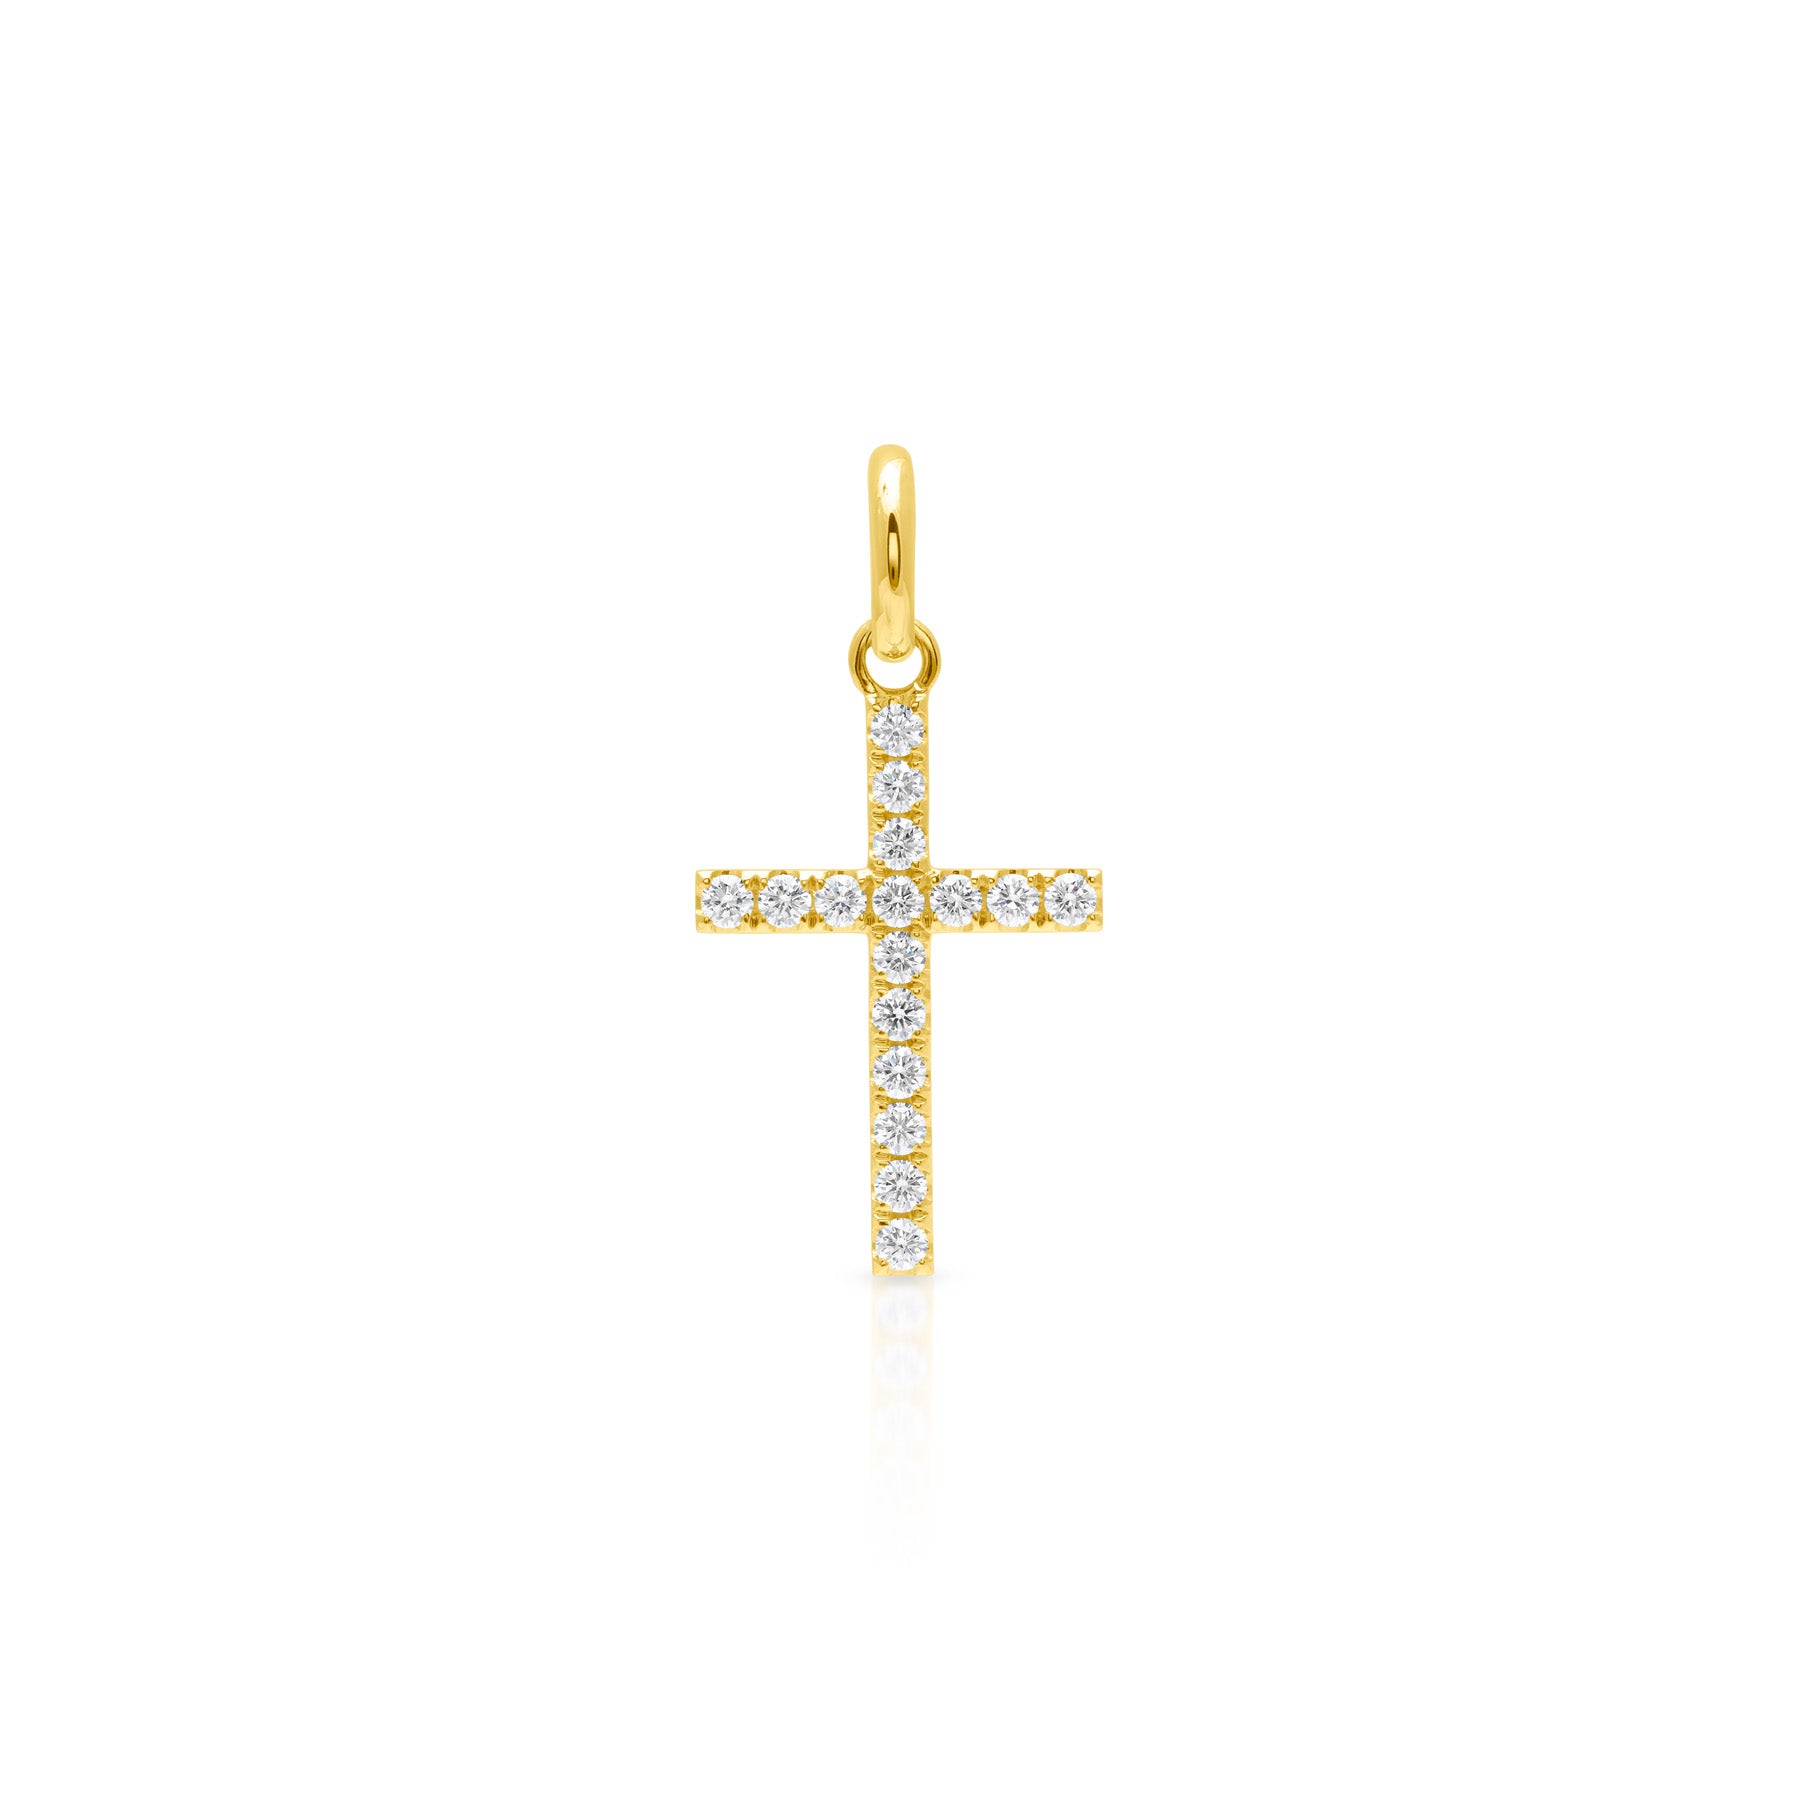 14KT Yellow Gold Diamond Large Cross Charm Pendant with Clip on Bail